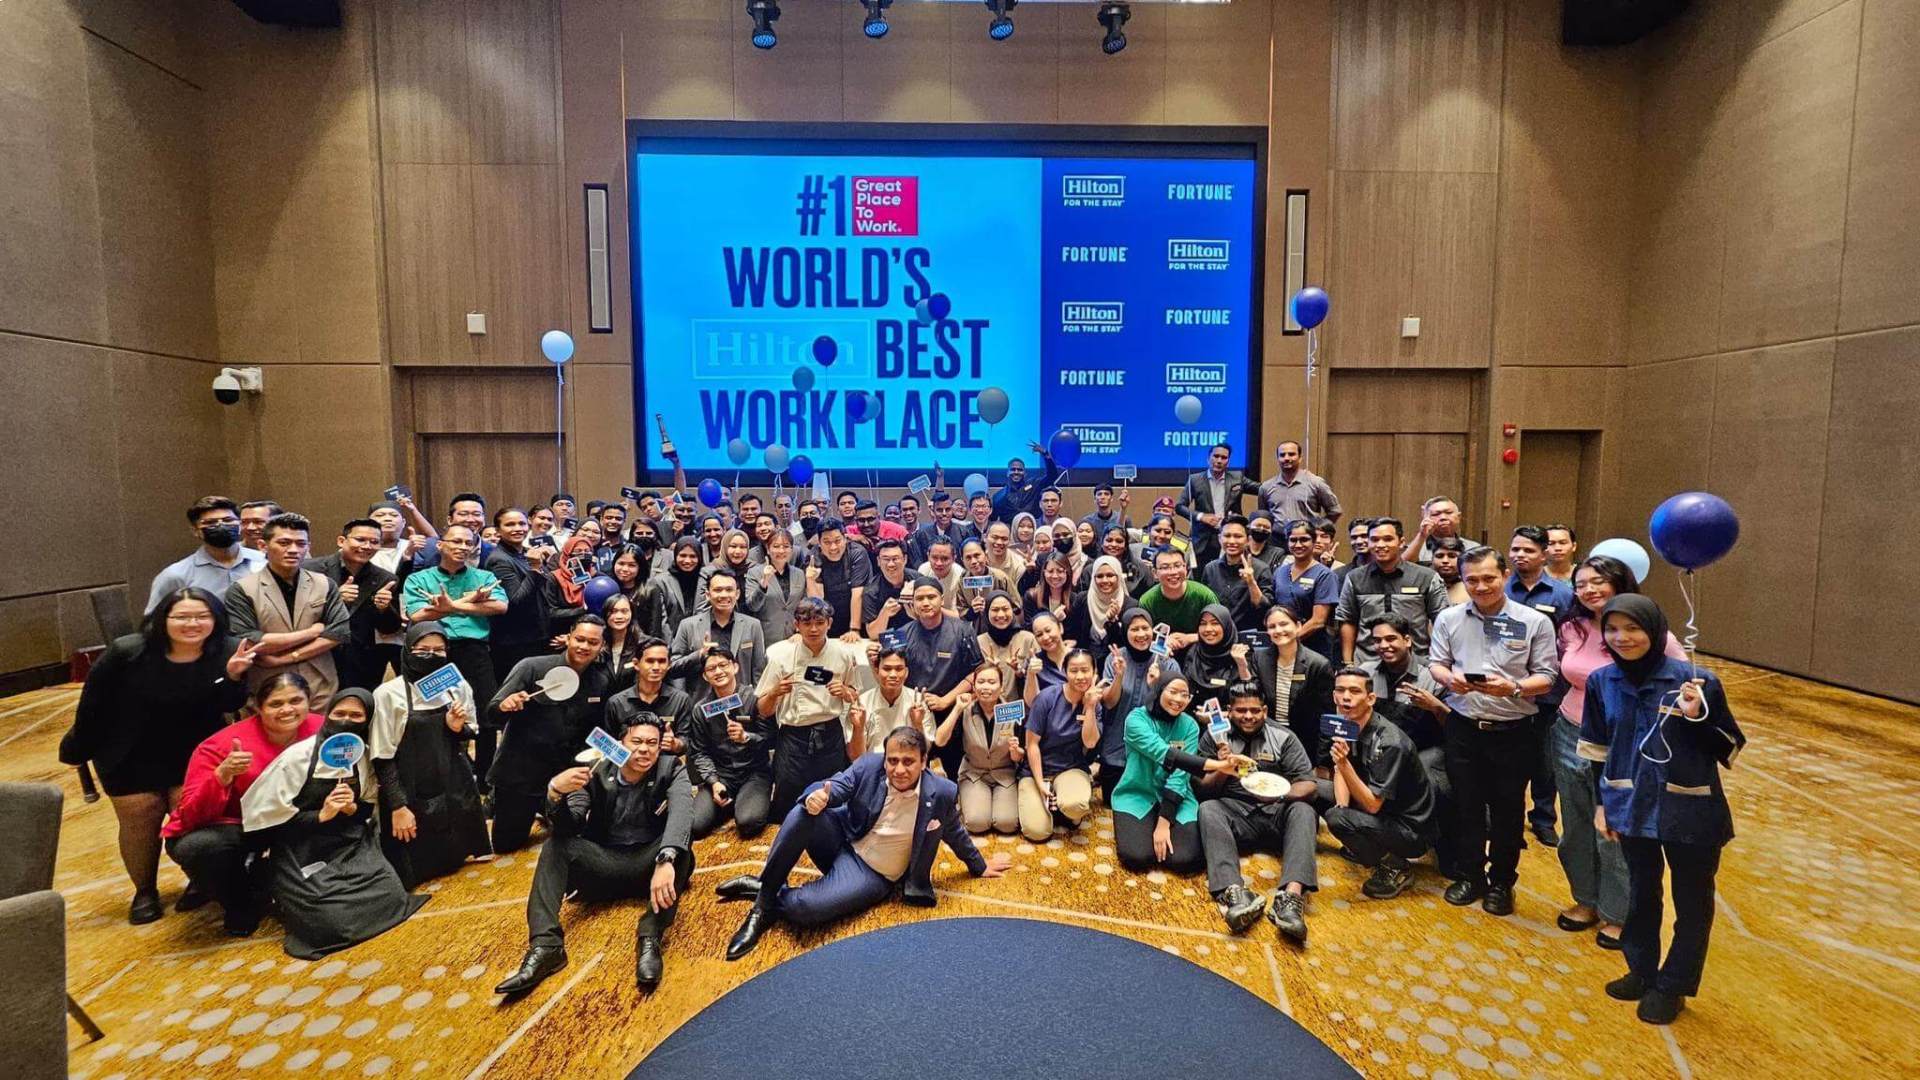 A group photo celebrating an award for #1 Worlds best workplace